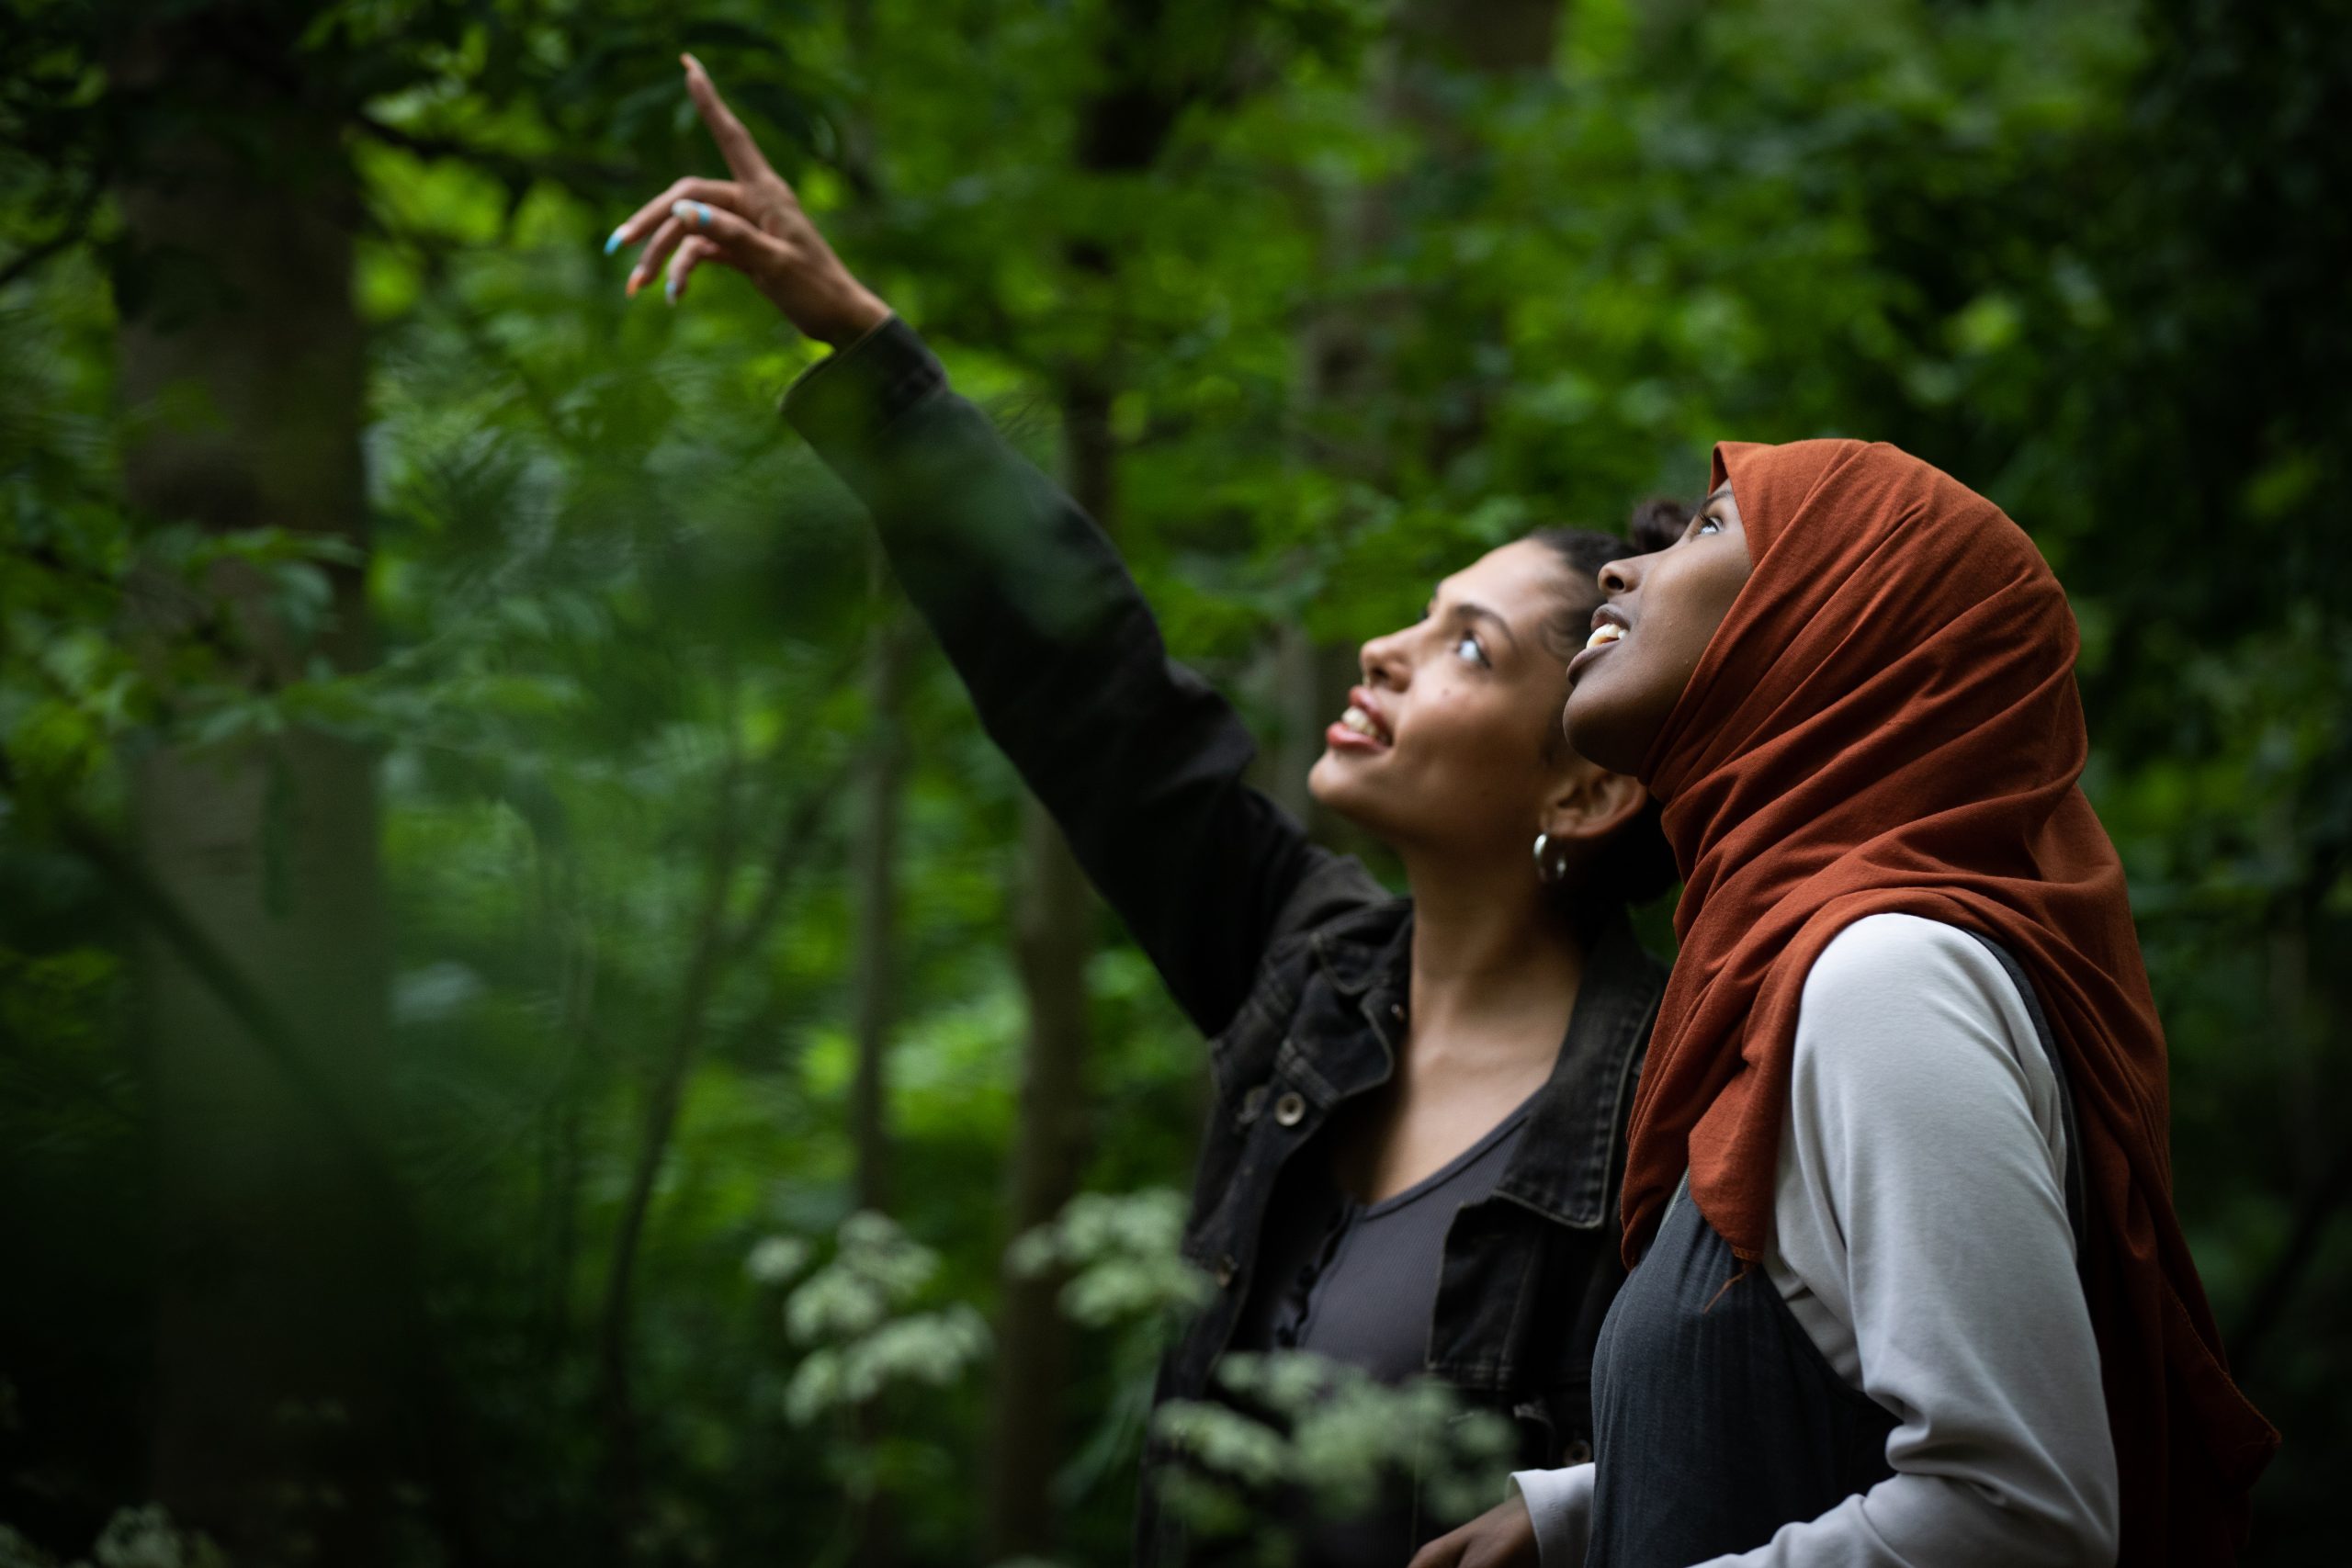 two people looking up at the sky in a forest. One wears an orange headscarf and the other is pointing upwards